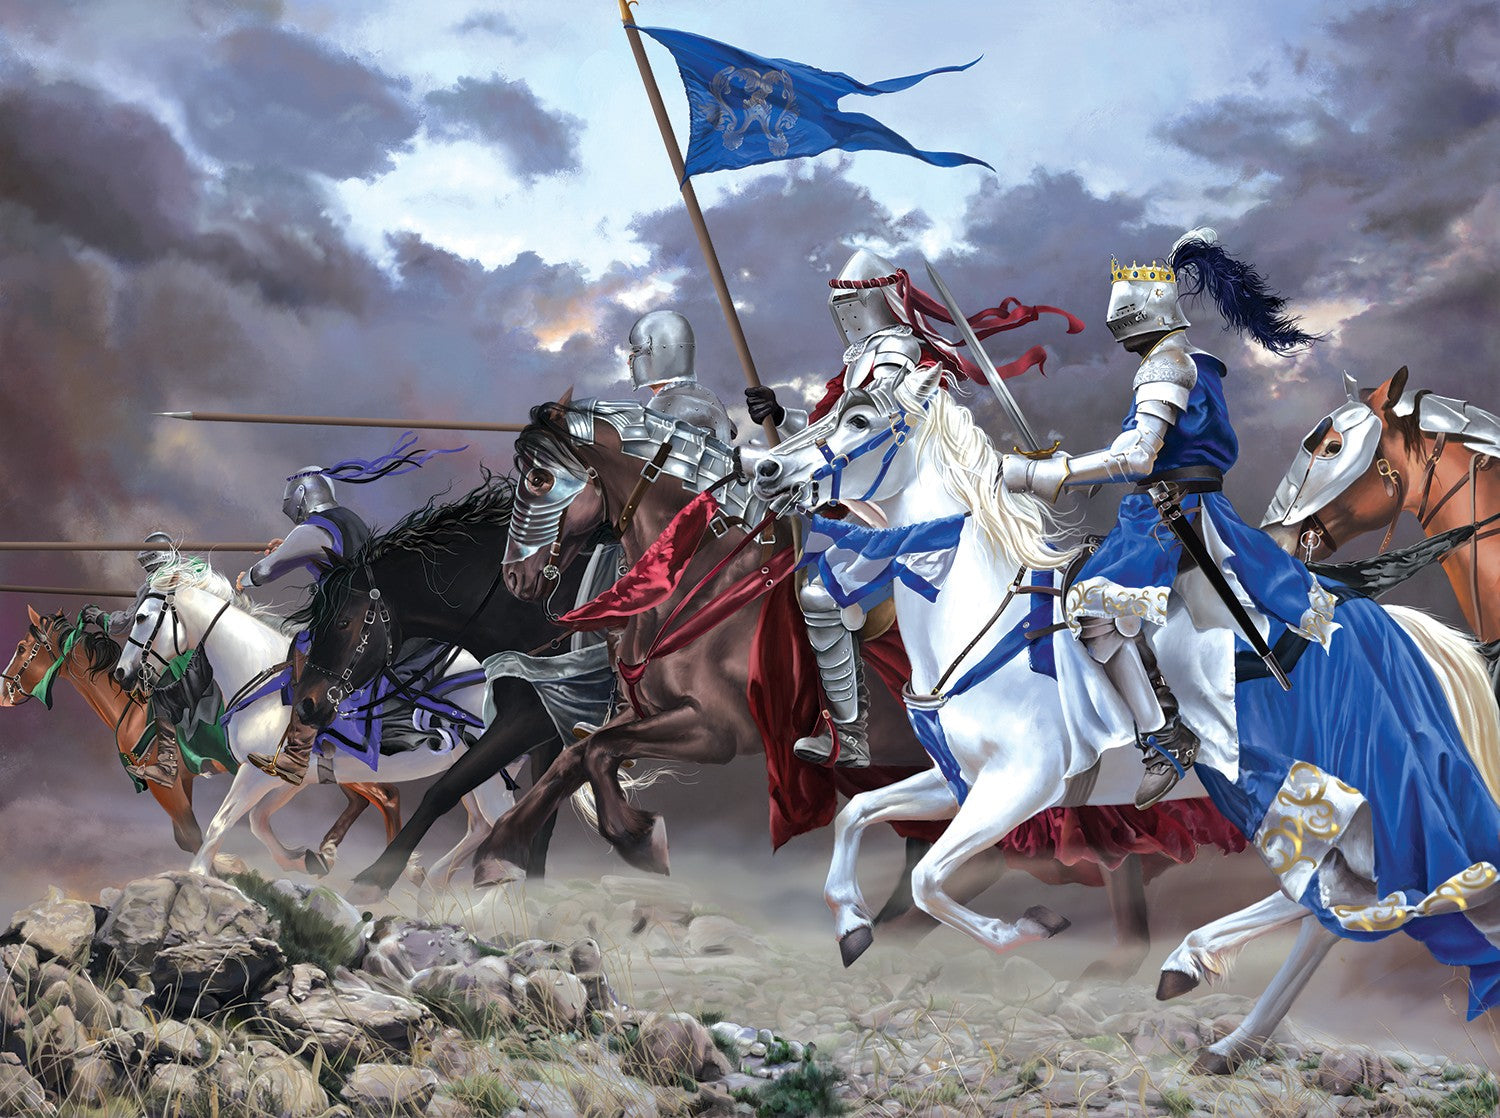 Knights Charge by Nene Thomas 1000 Piece Jigsaw Puzzle